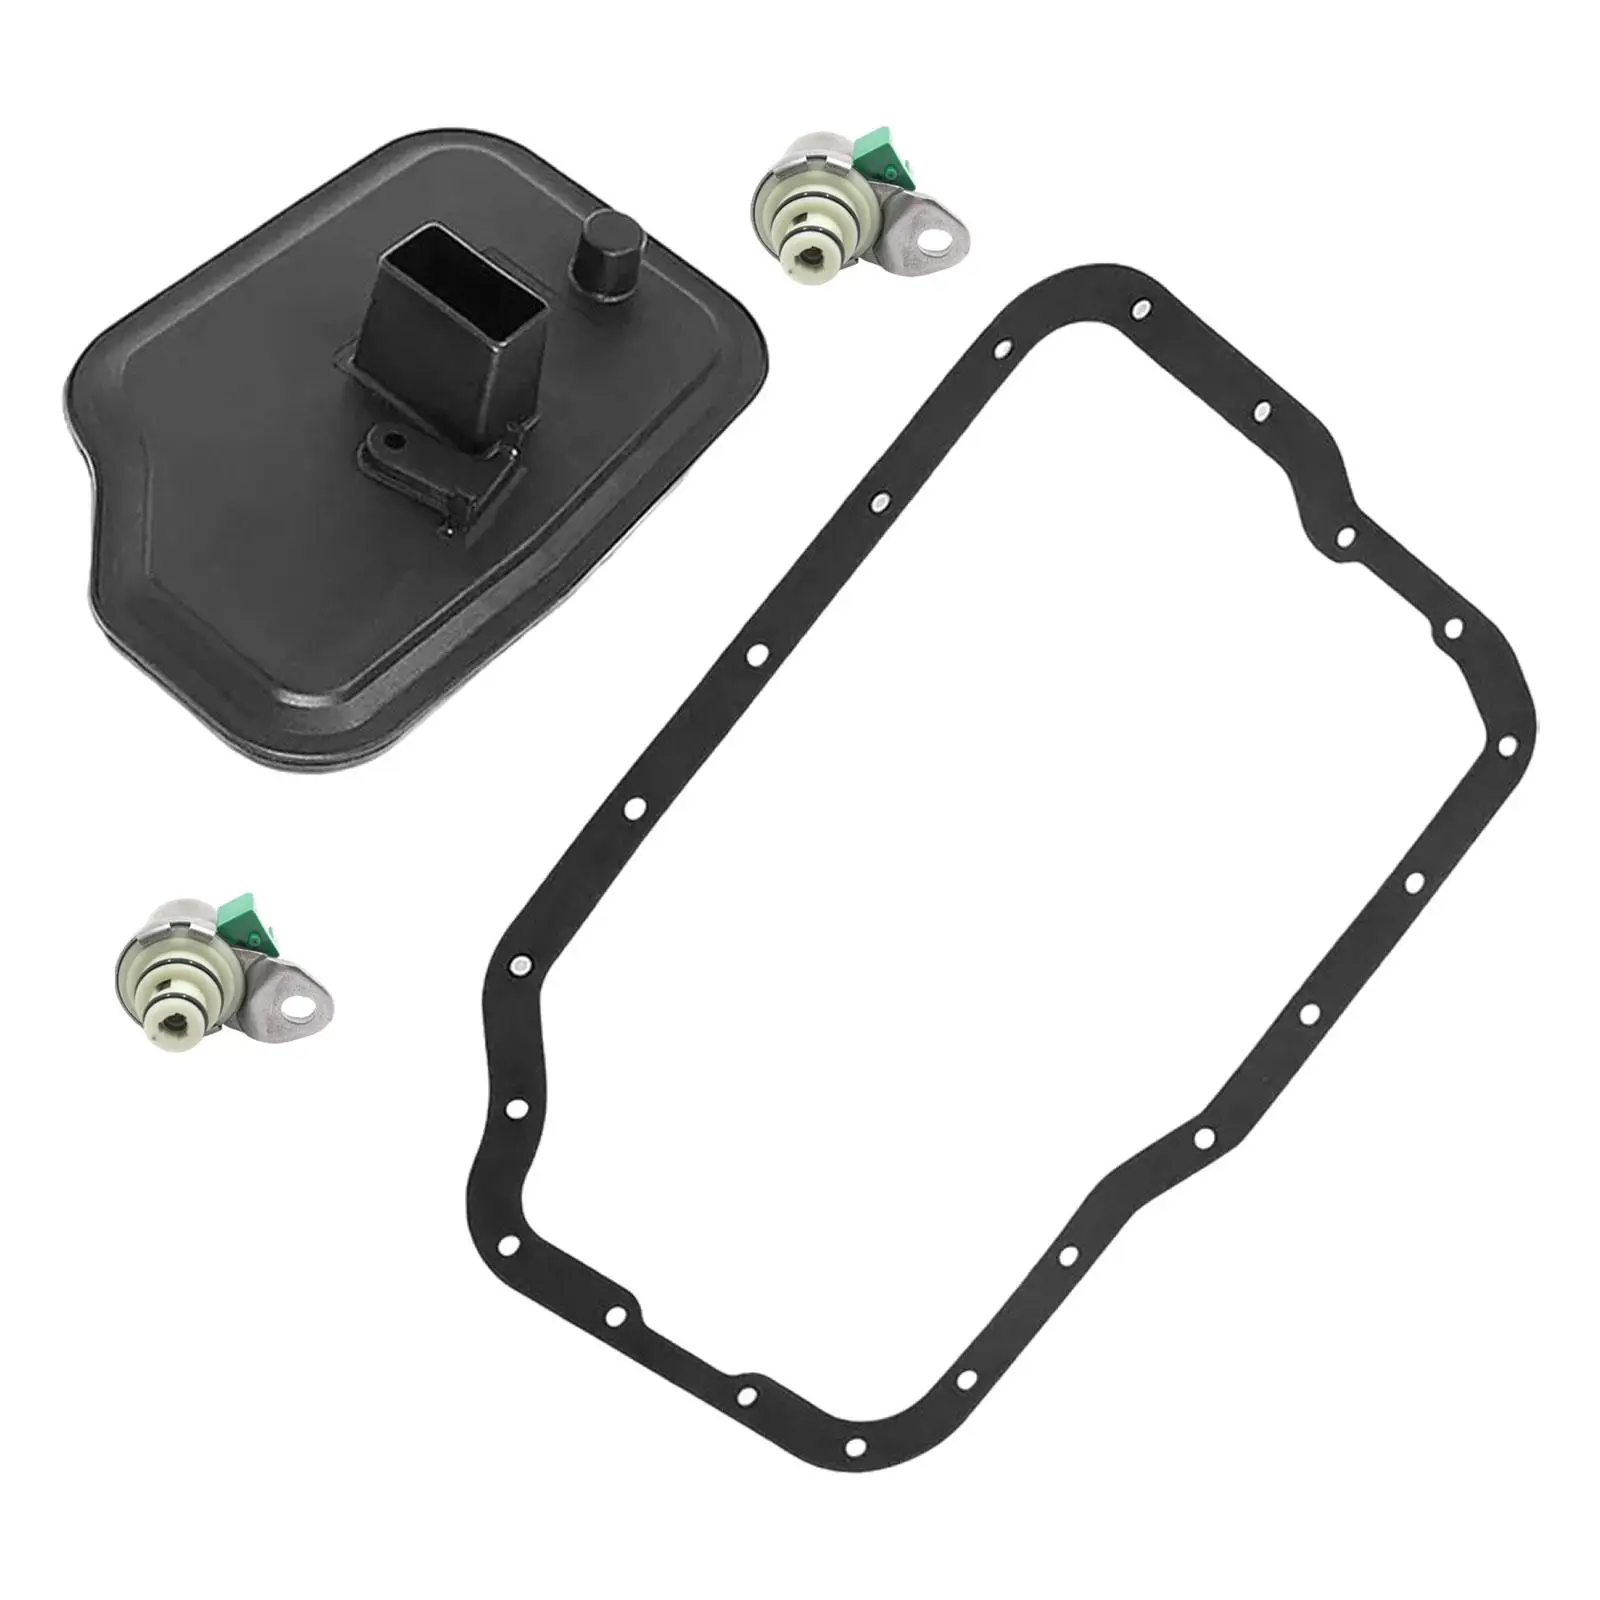 Automatic Transmission Filter Kit Accessory for Ford High Performance